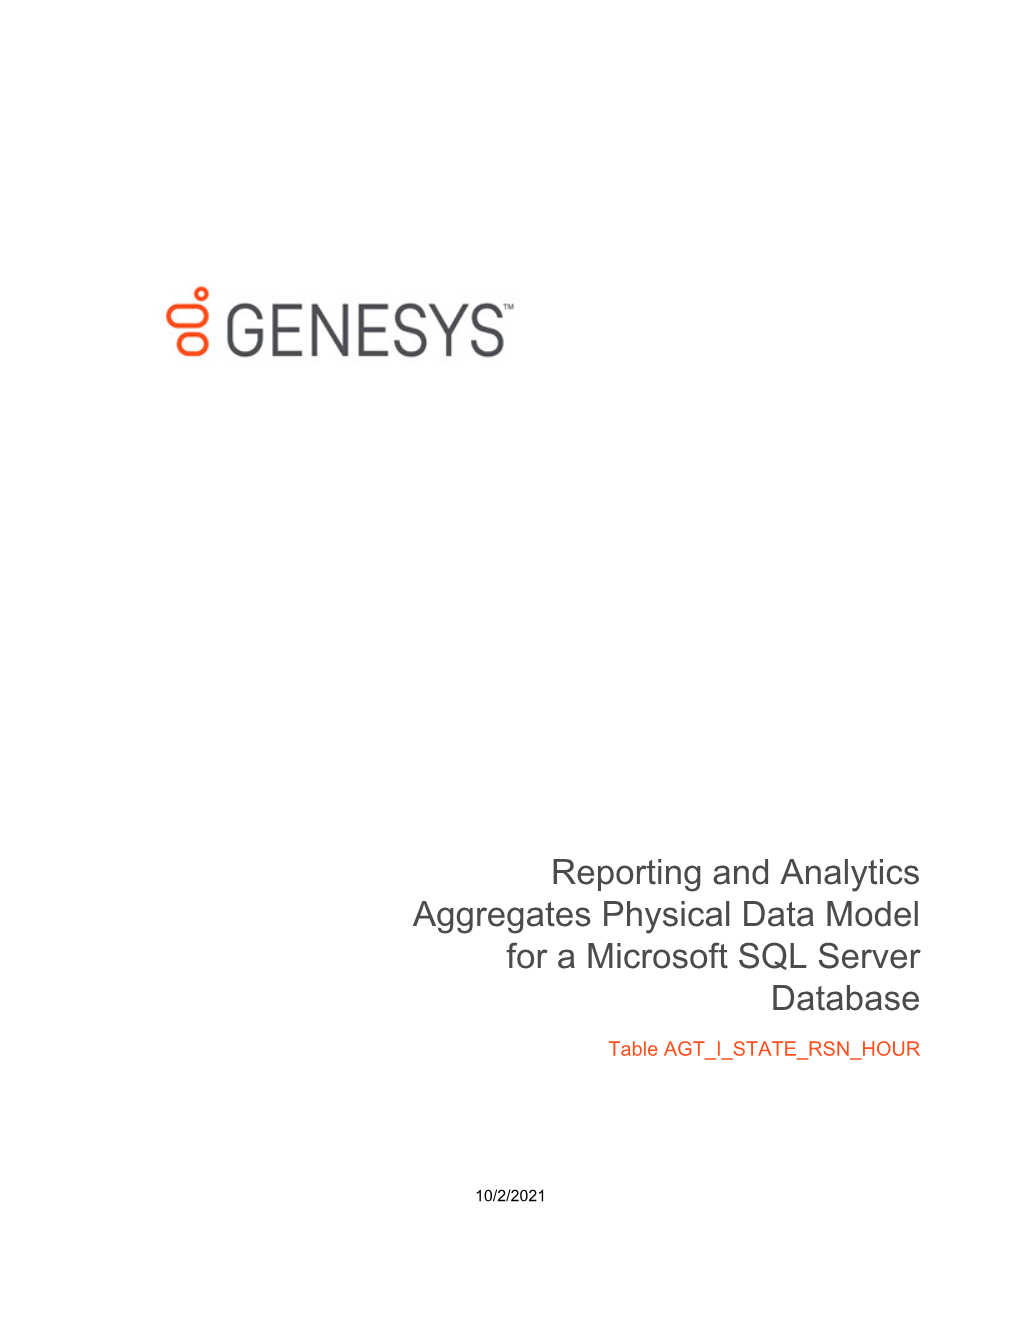 Reporting and Analytics Aggregates Physical Data Model for a Microsoft SQL Server Database